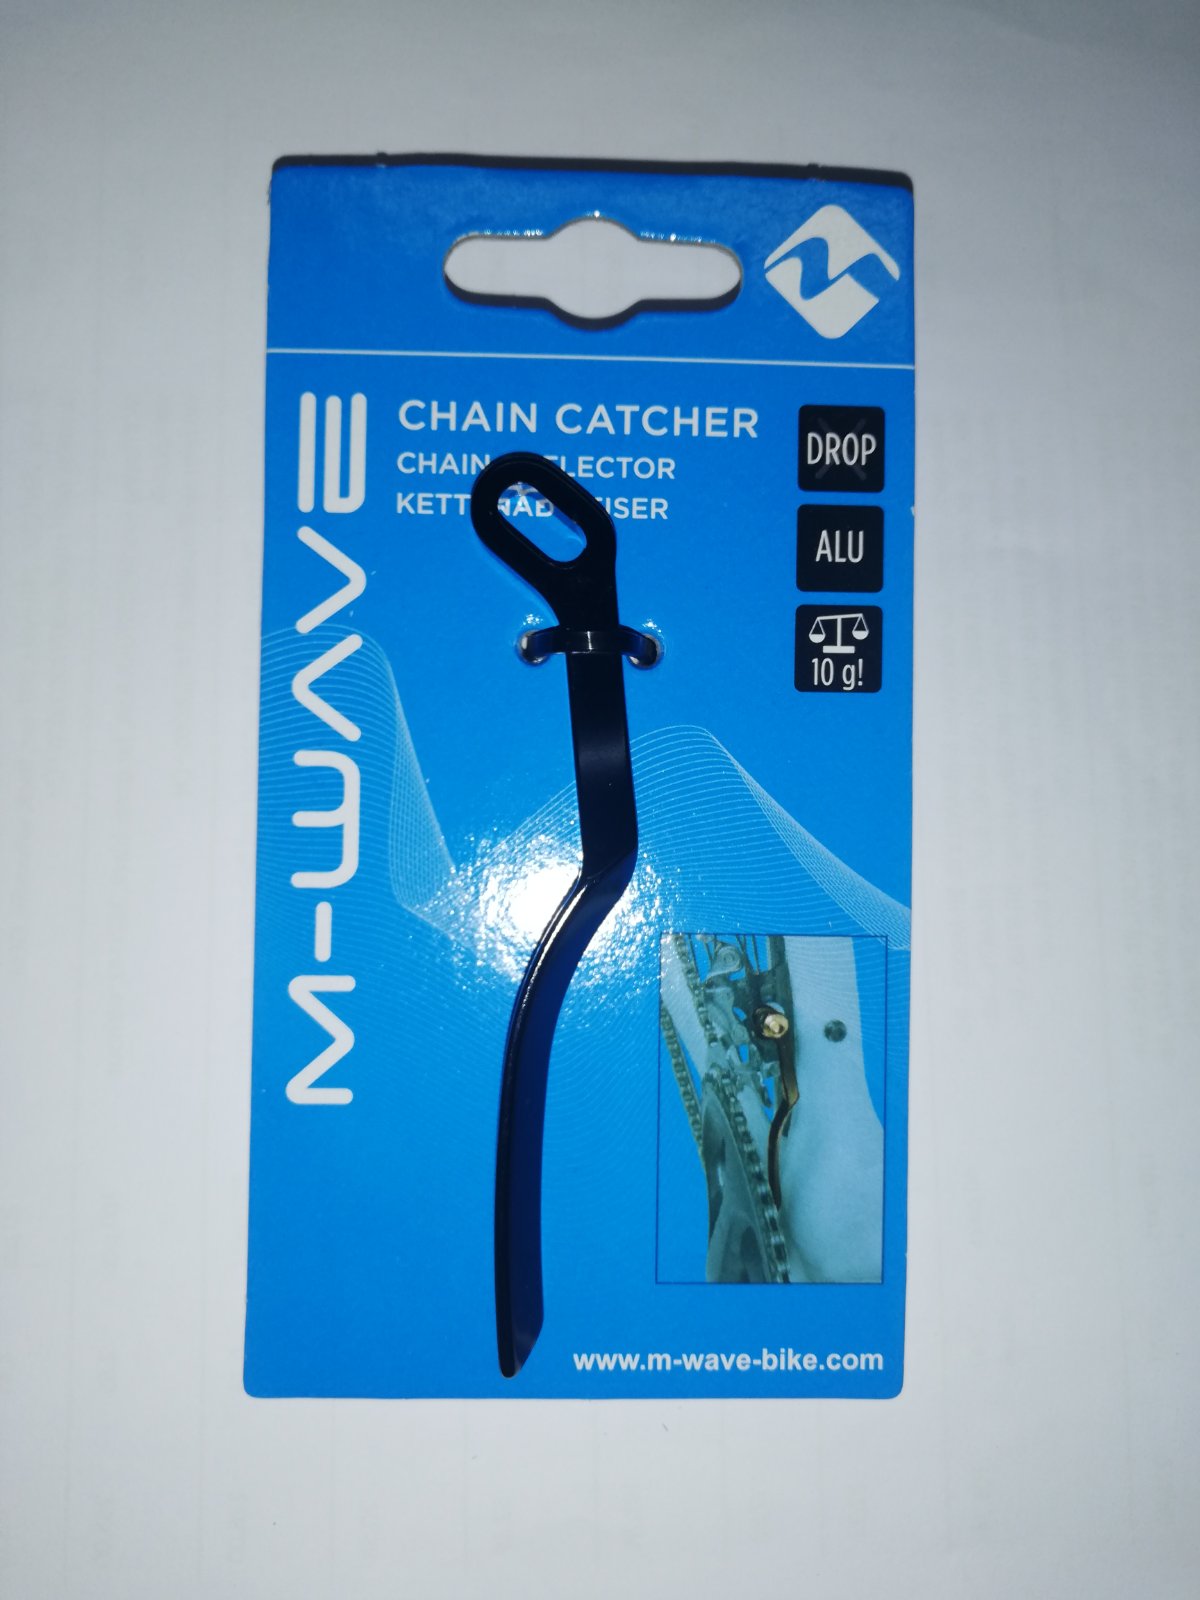 300183 – Chain Catcher – AVAILABLE IN SELECTED BIKE SHOPS